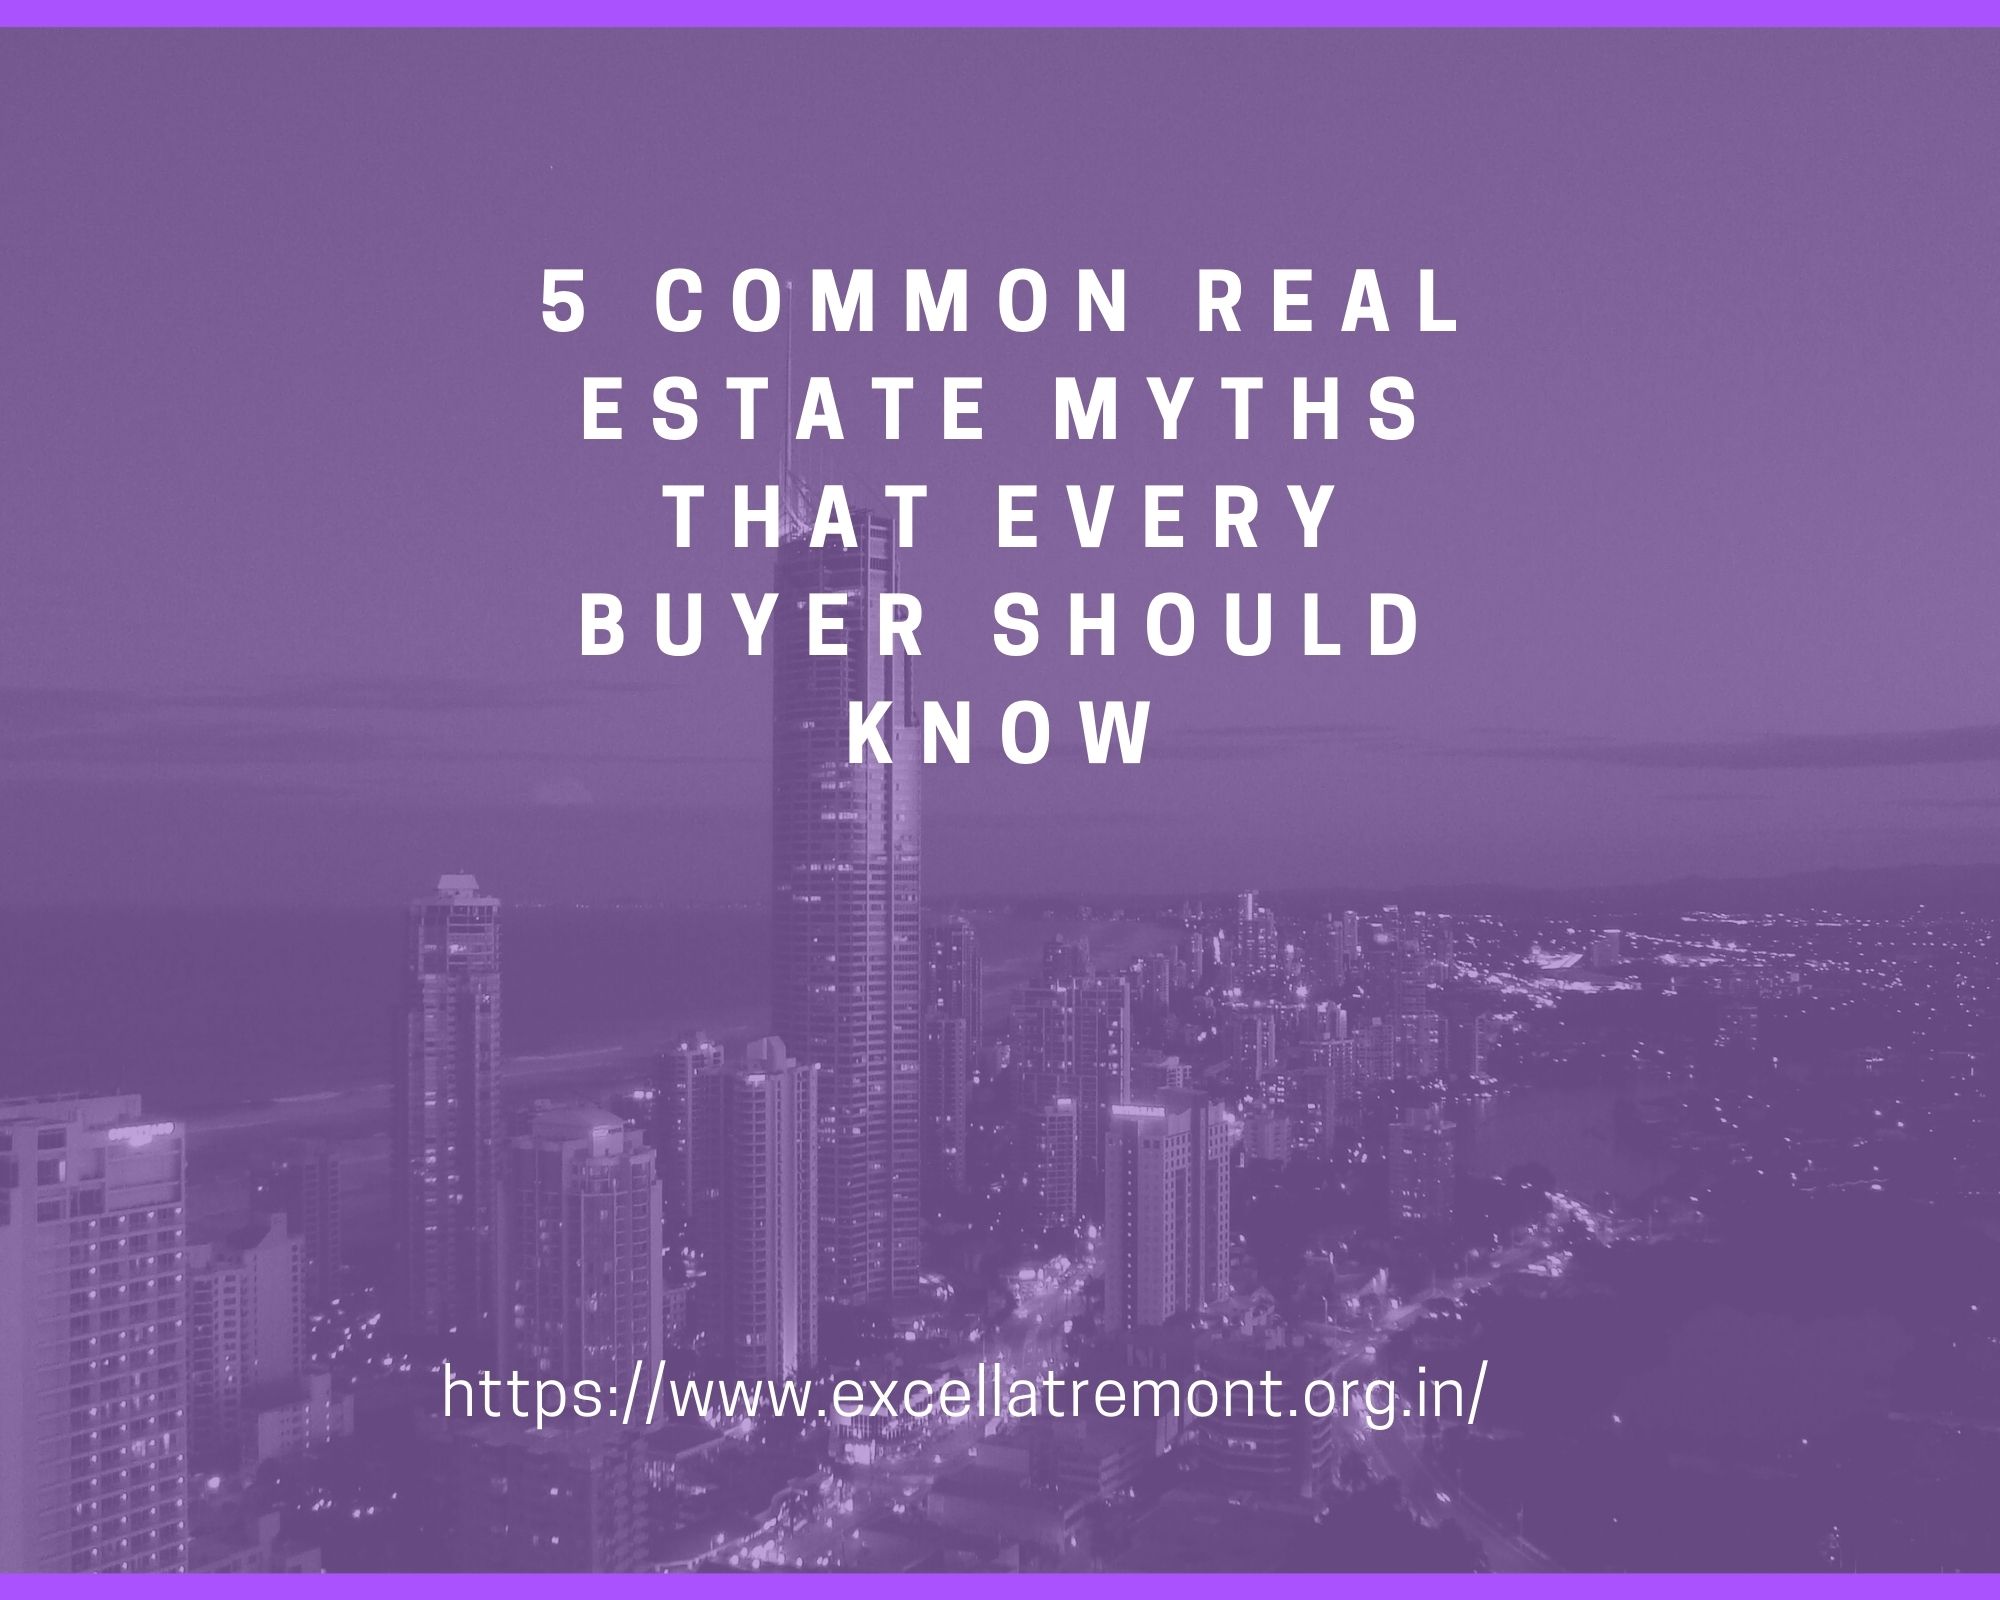 5 common real estate myths that every buyer should know